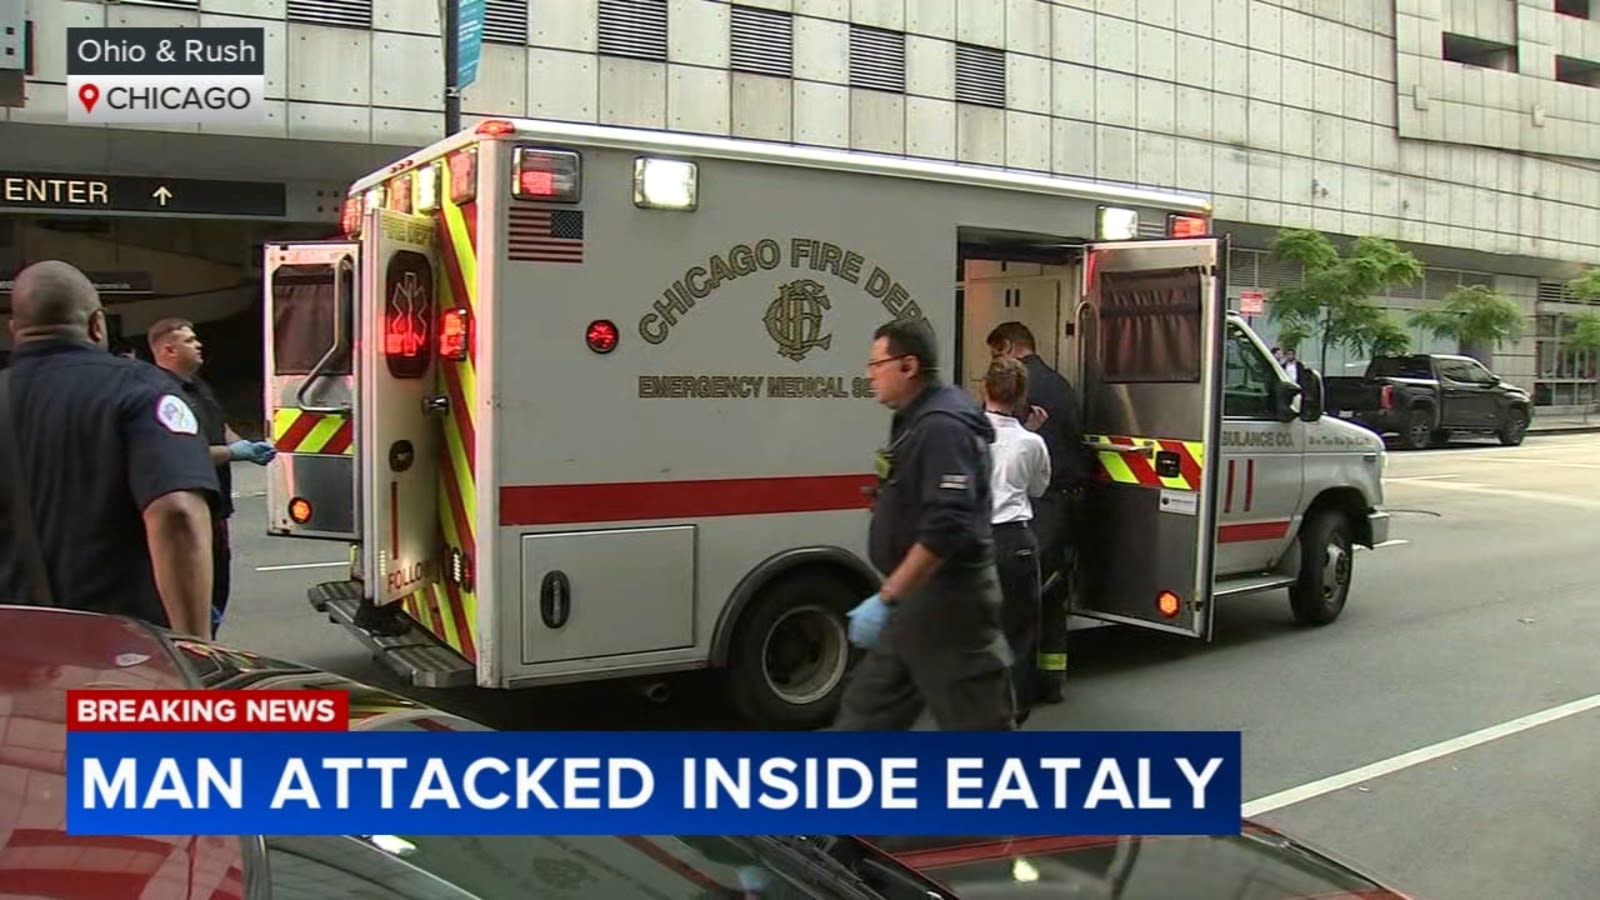 Man punched in the face at Eataly in River North, prompting large police response, CFD says